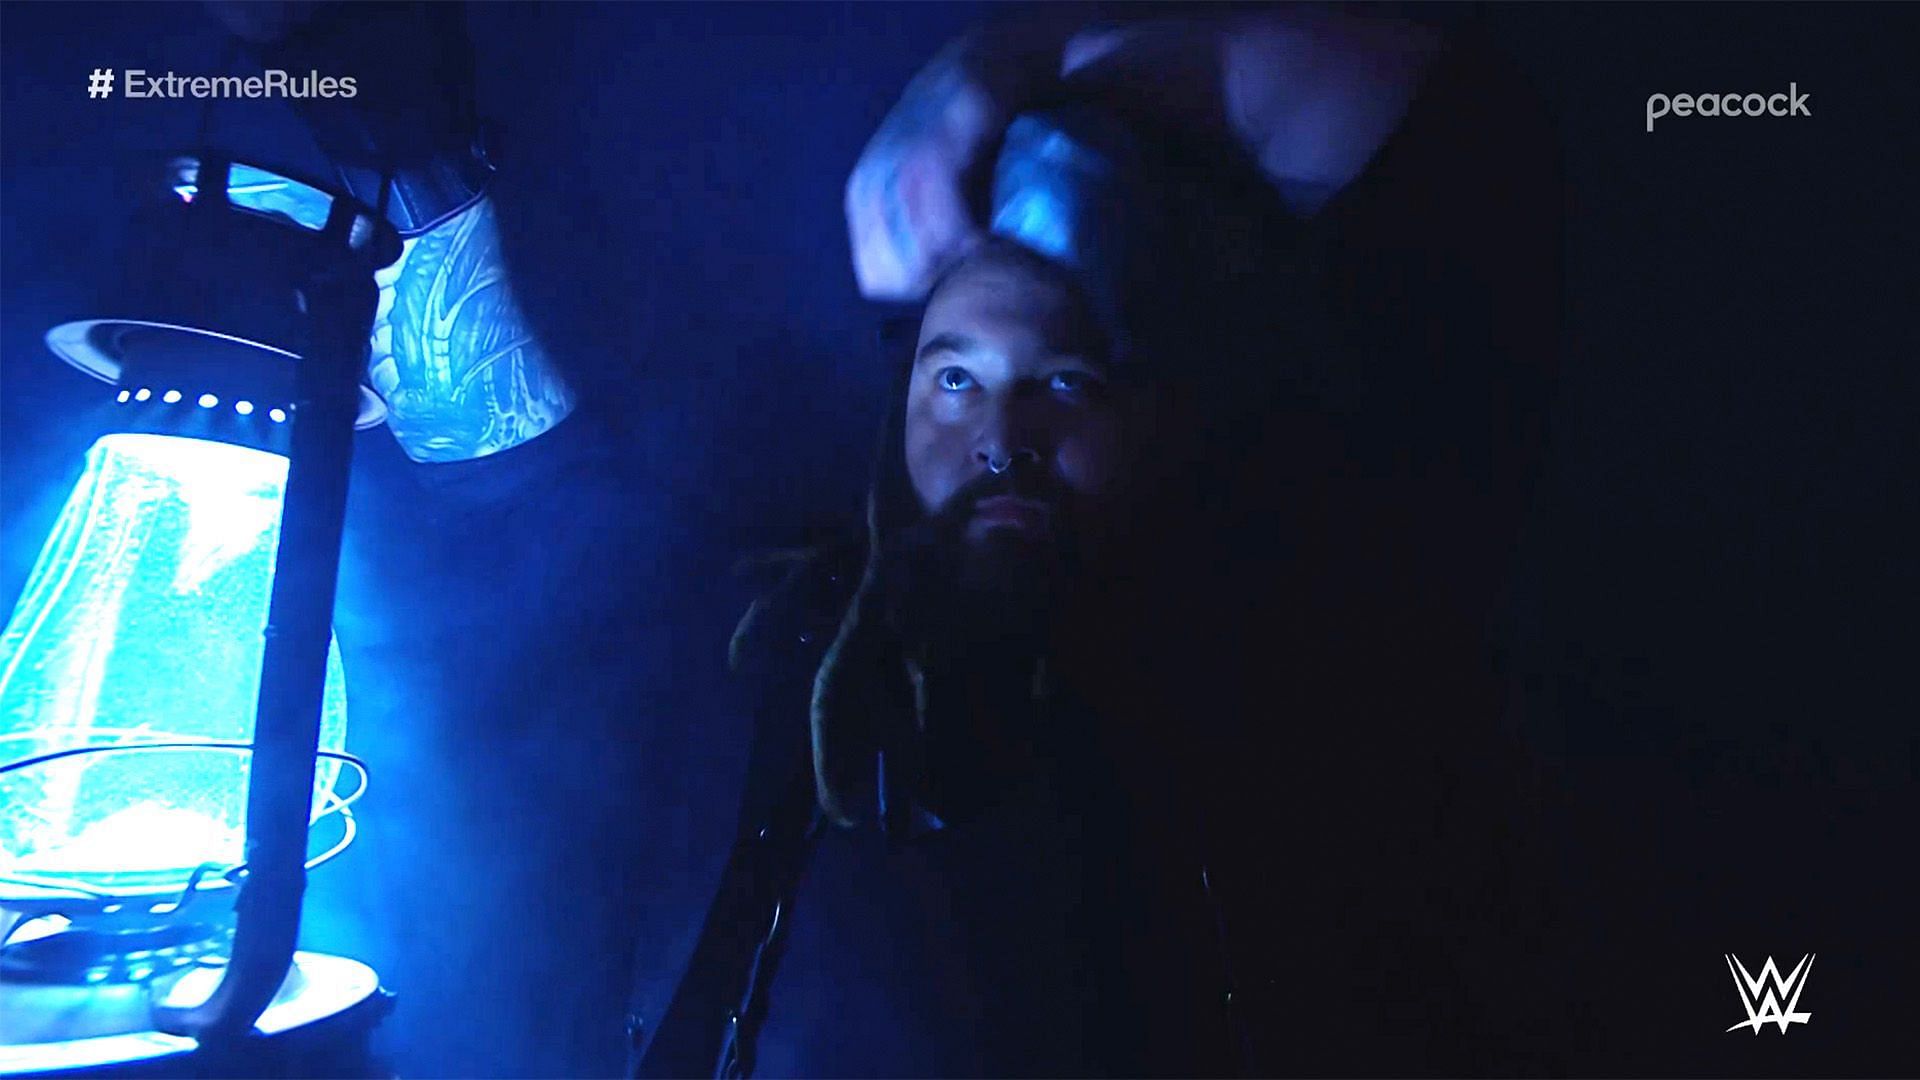 Bray Wyatt returned to WWE at Extreme Rules